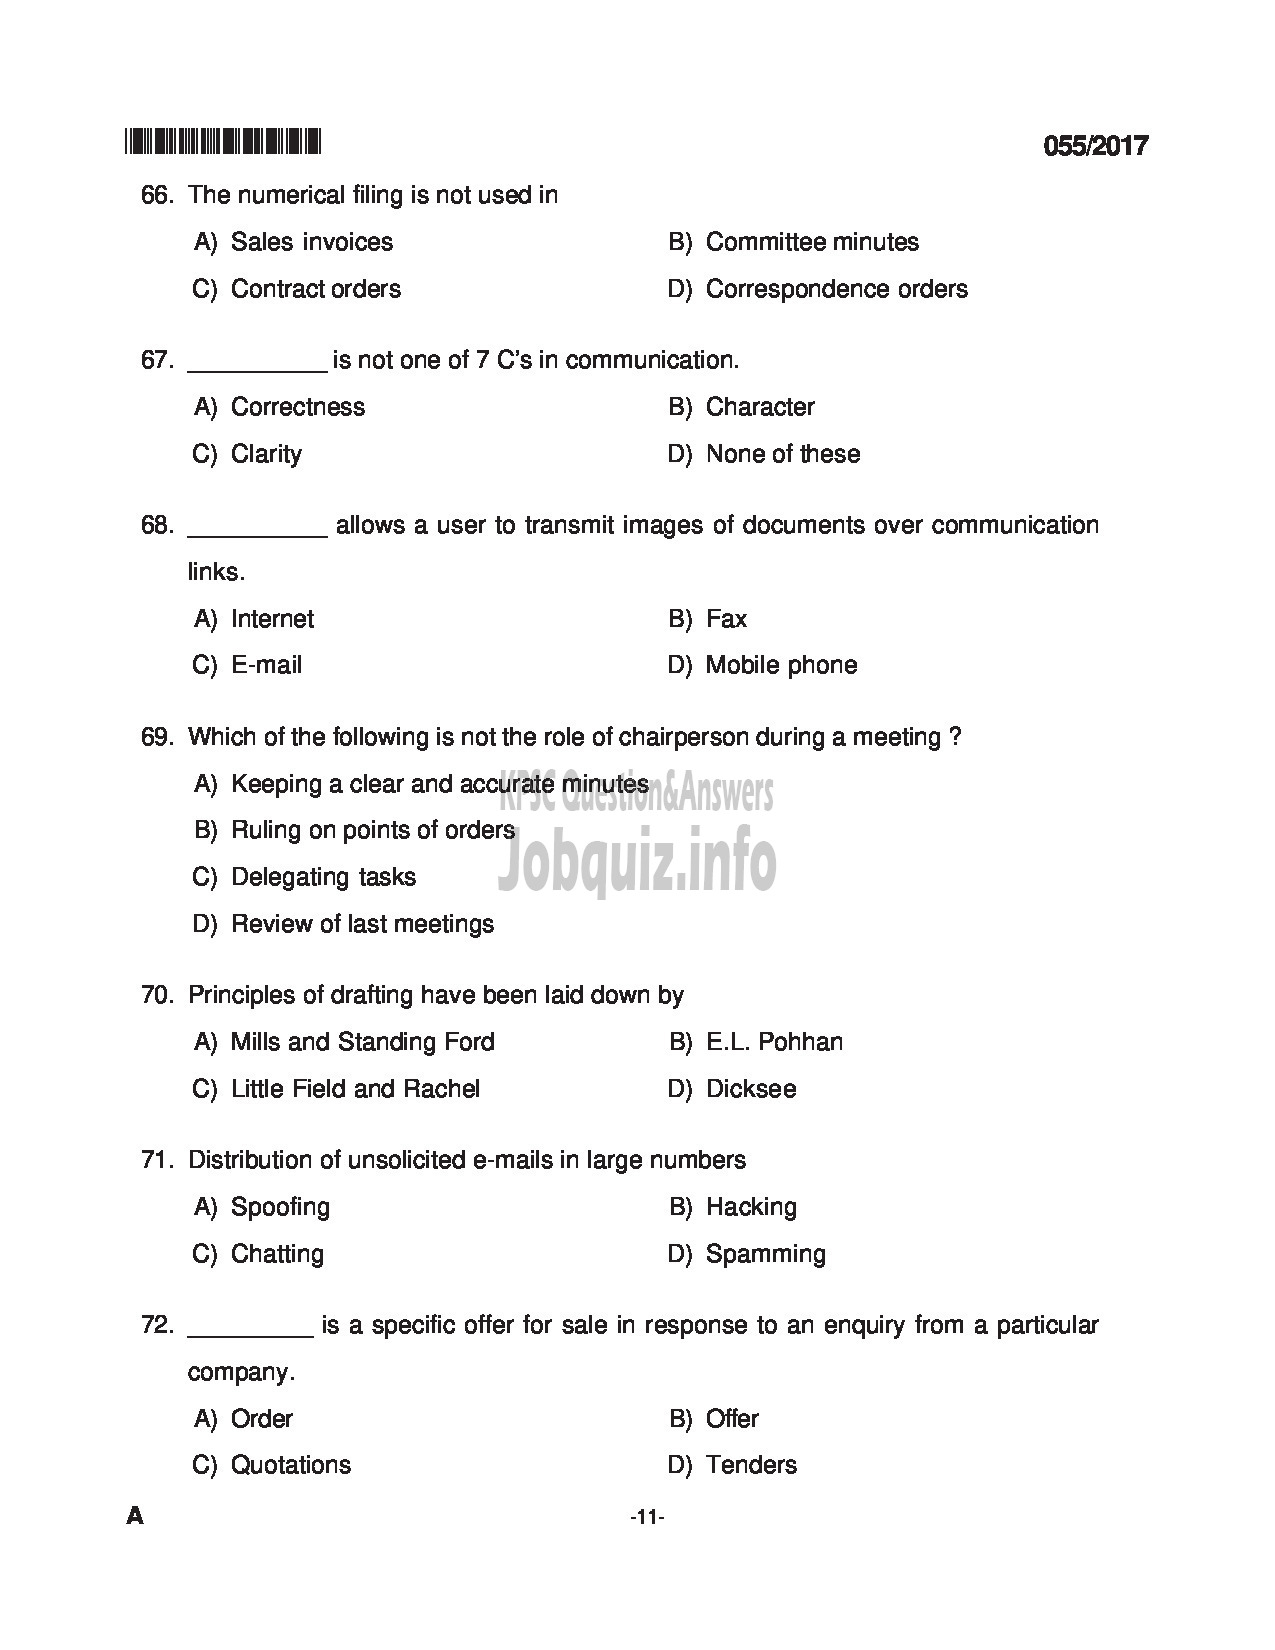 Kerala PSC Question Paper - INSTRUCTOR IN SECRETARIAL PRACTICE AND BM TECHNICAL EDUCATION QUESTION PAPER-11